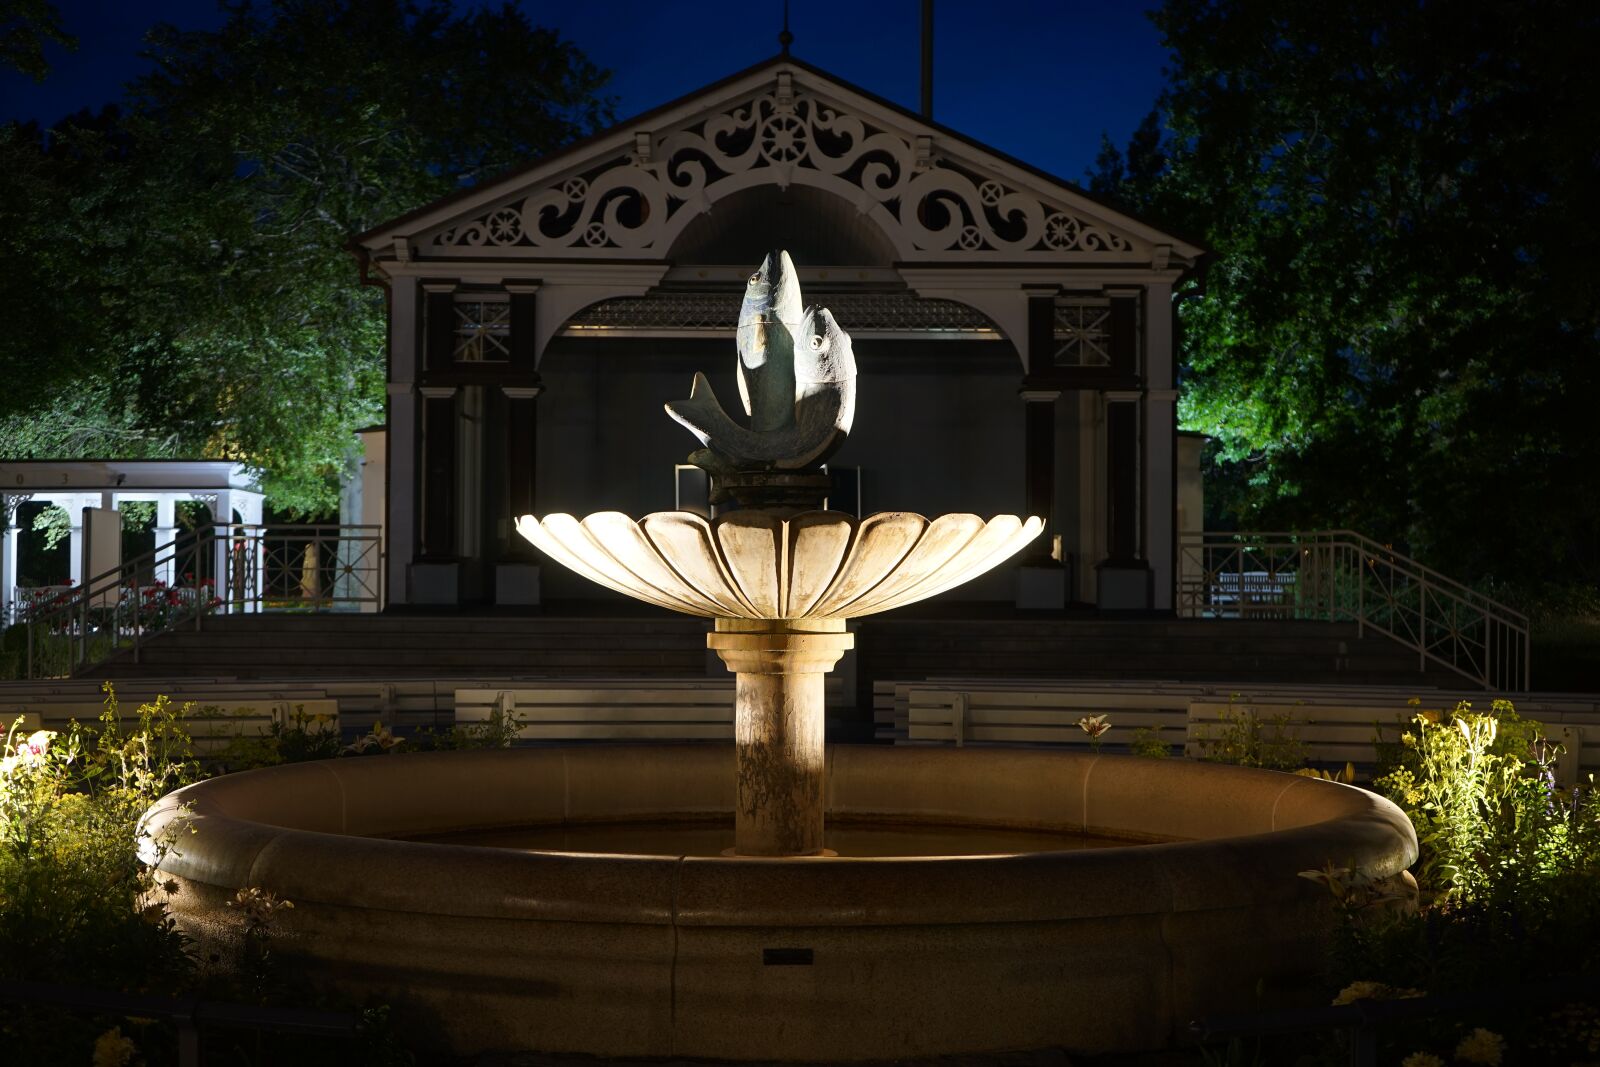 Sony a7 sample photo. Fountain, places of interest photography